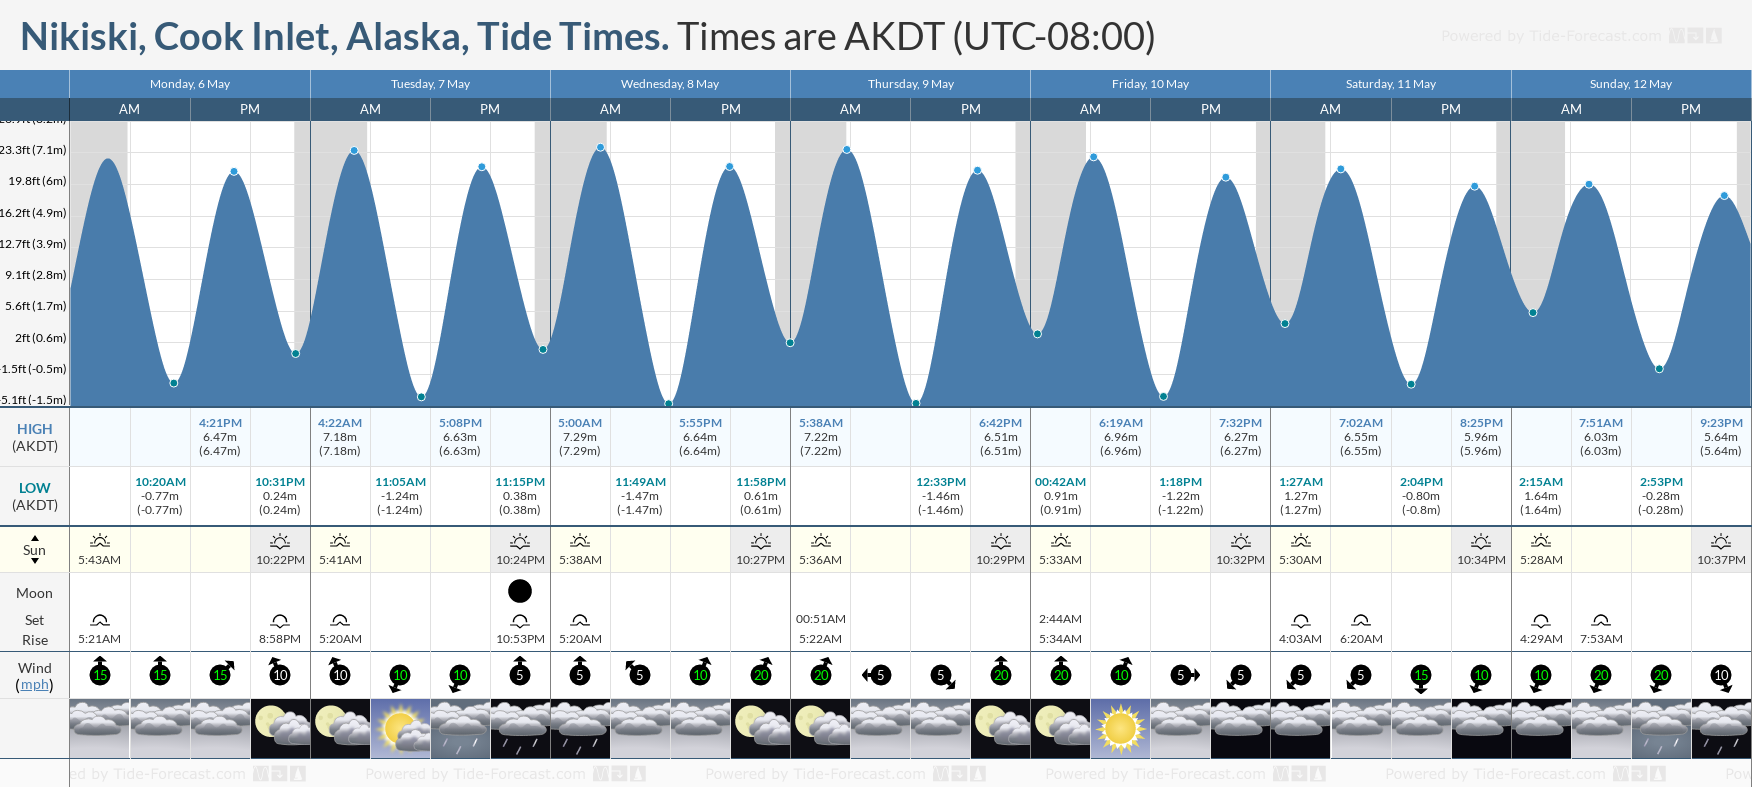 Nikiski, Cook Inlet, Alaska Tide Chart including high and low tide times for the next 7 days